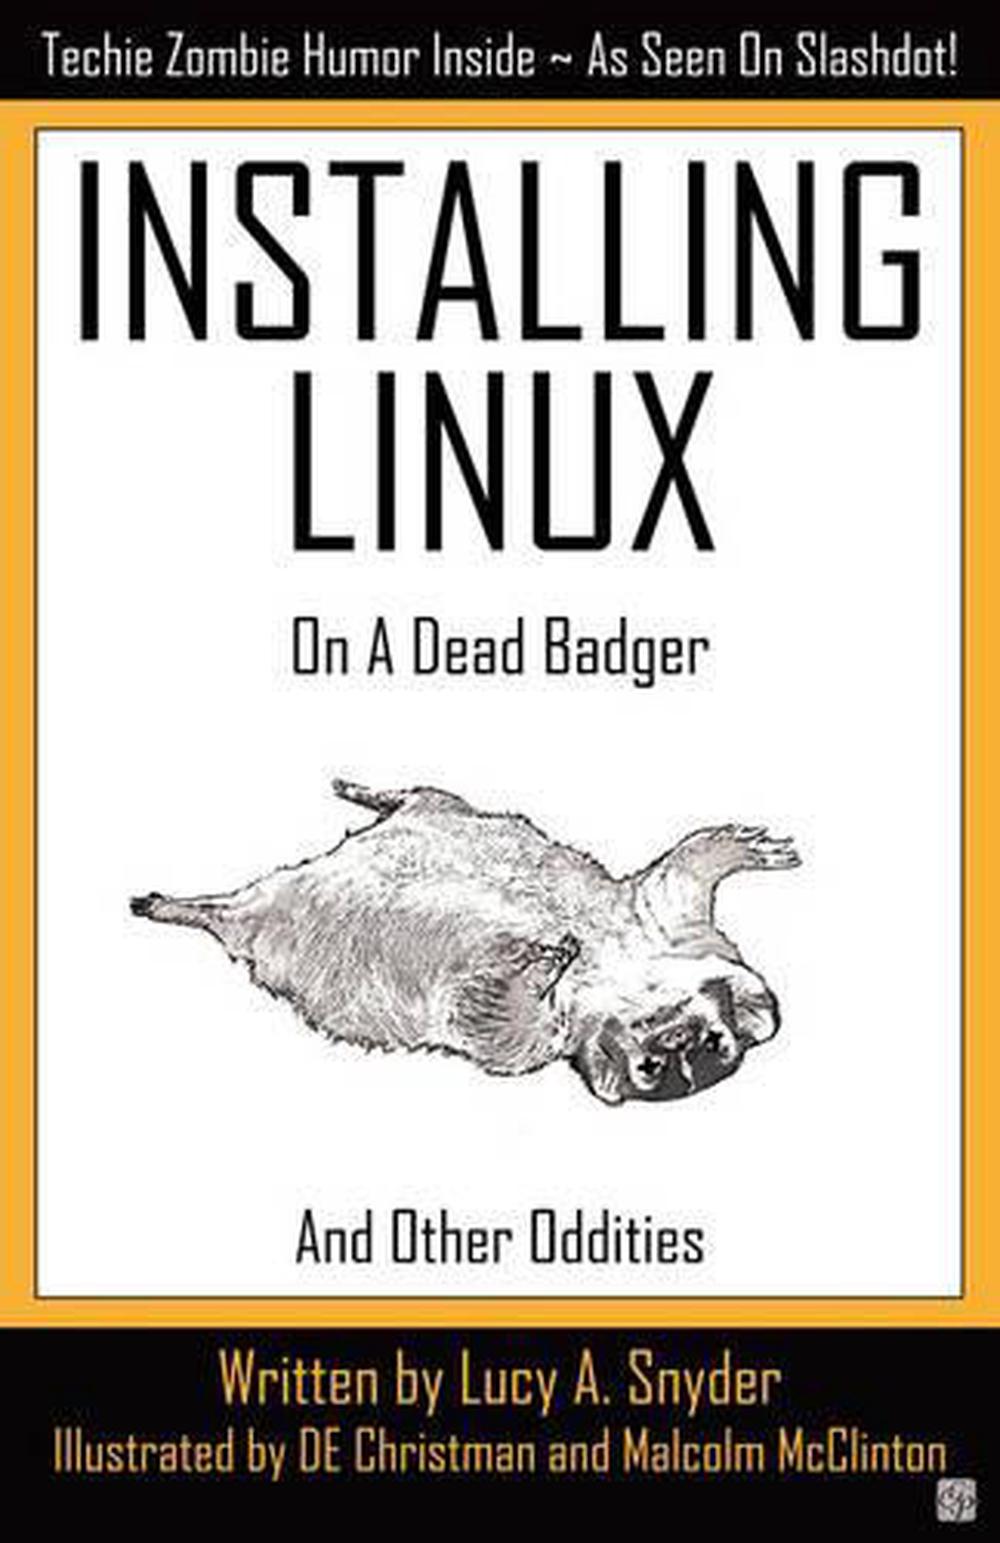 how to install linux on a dead badger